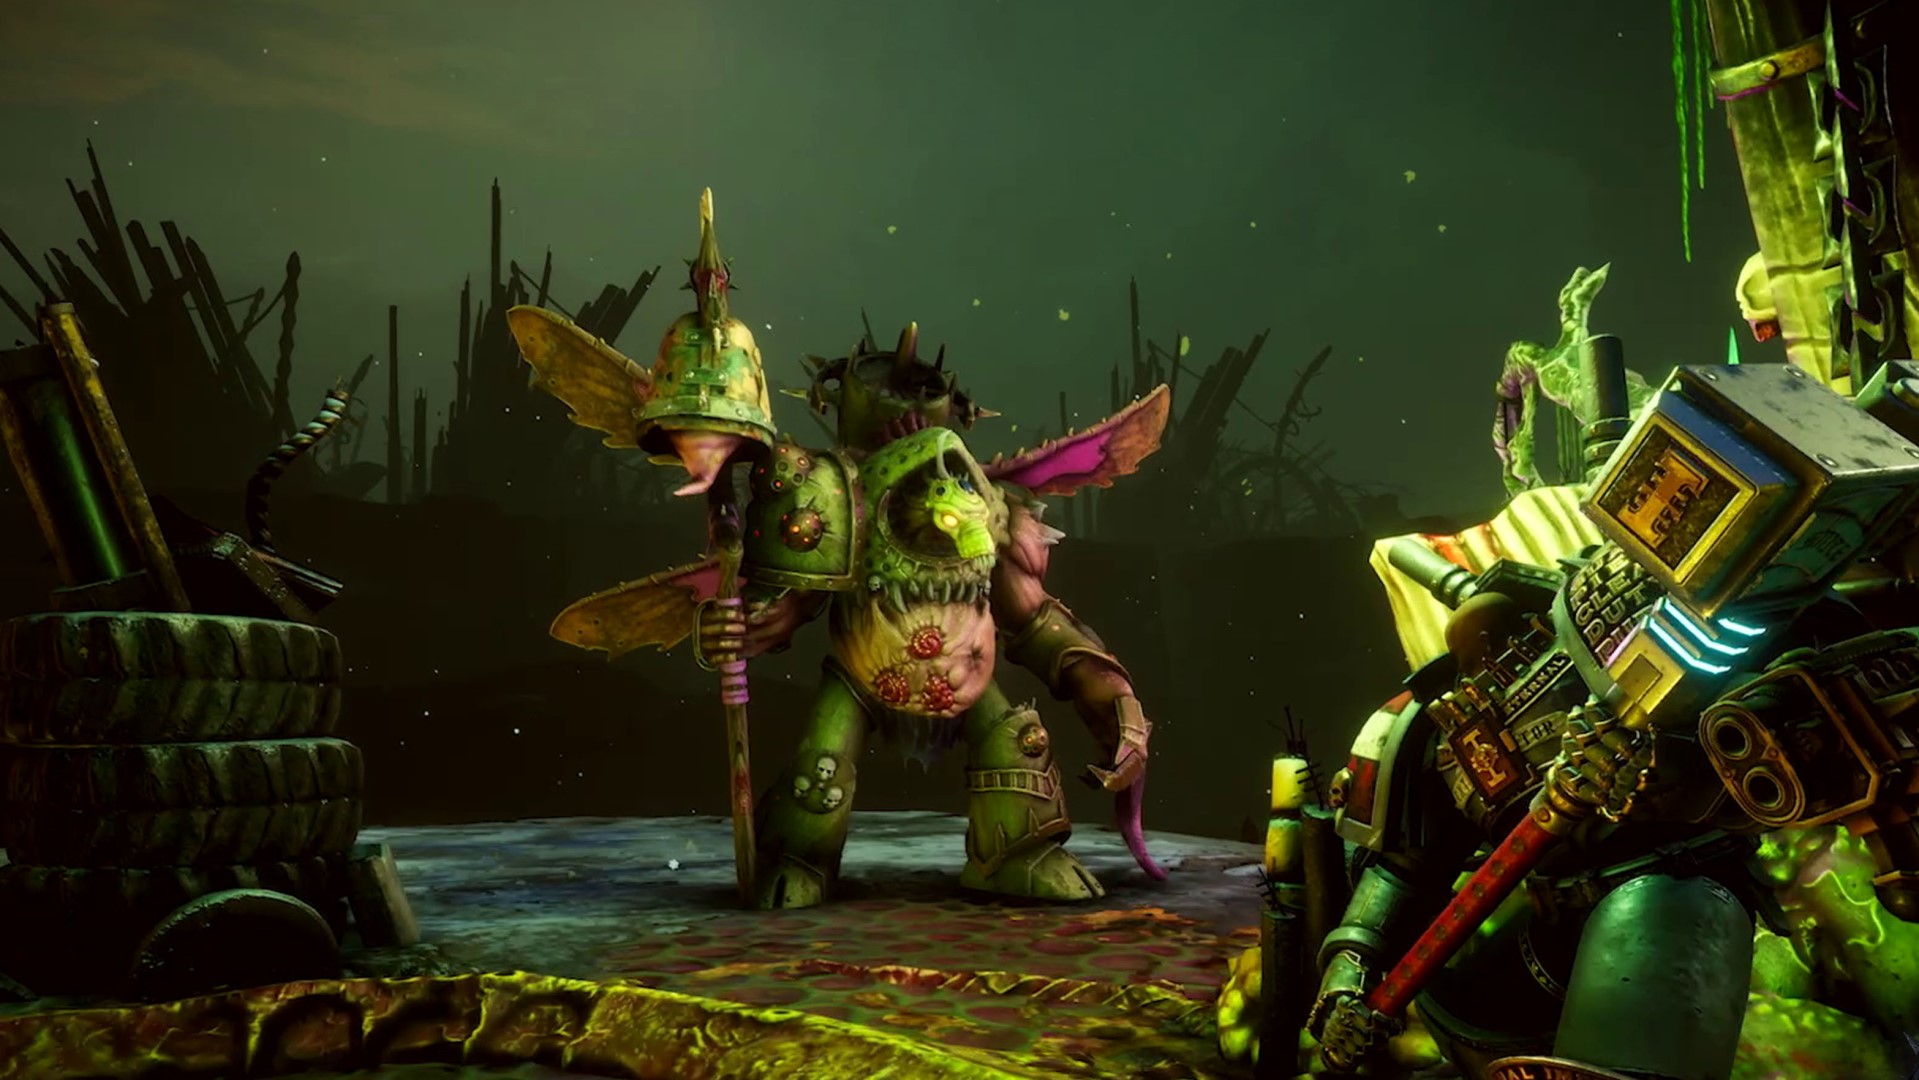 Chaos Gate – Daemonhunters will pit you against Nurgle's corruption, XCOM style